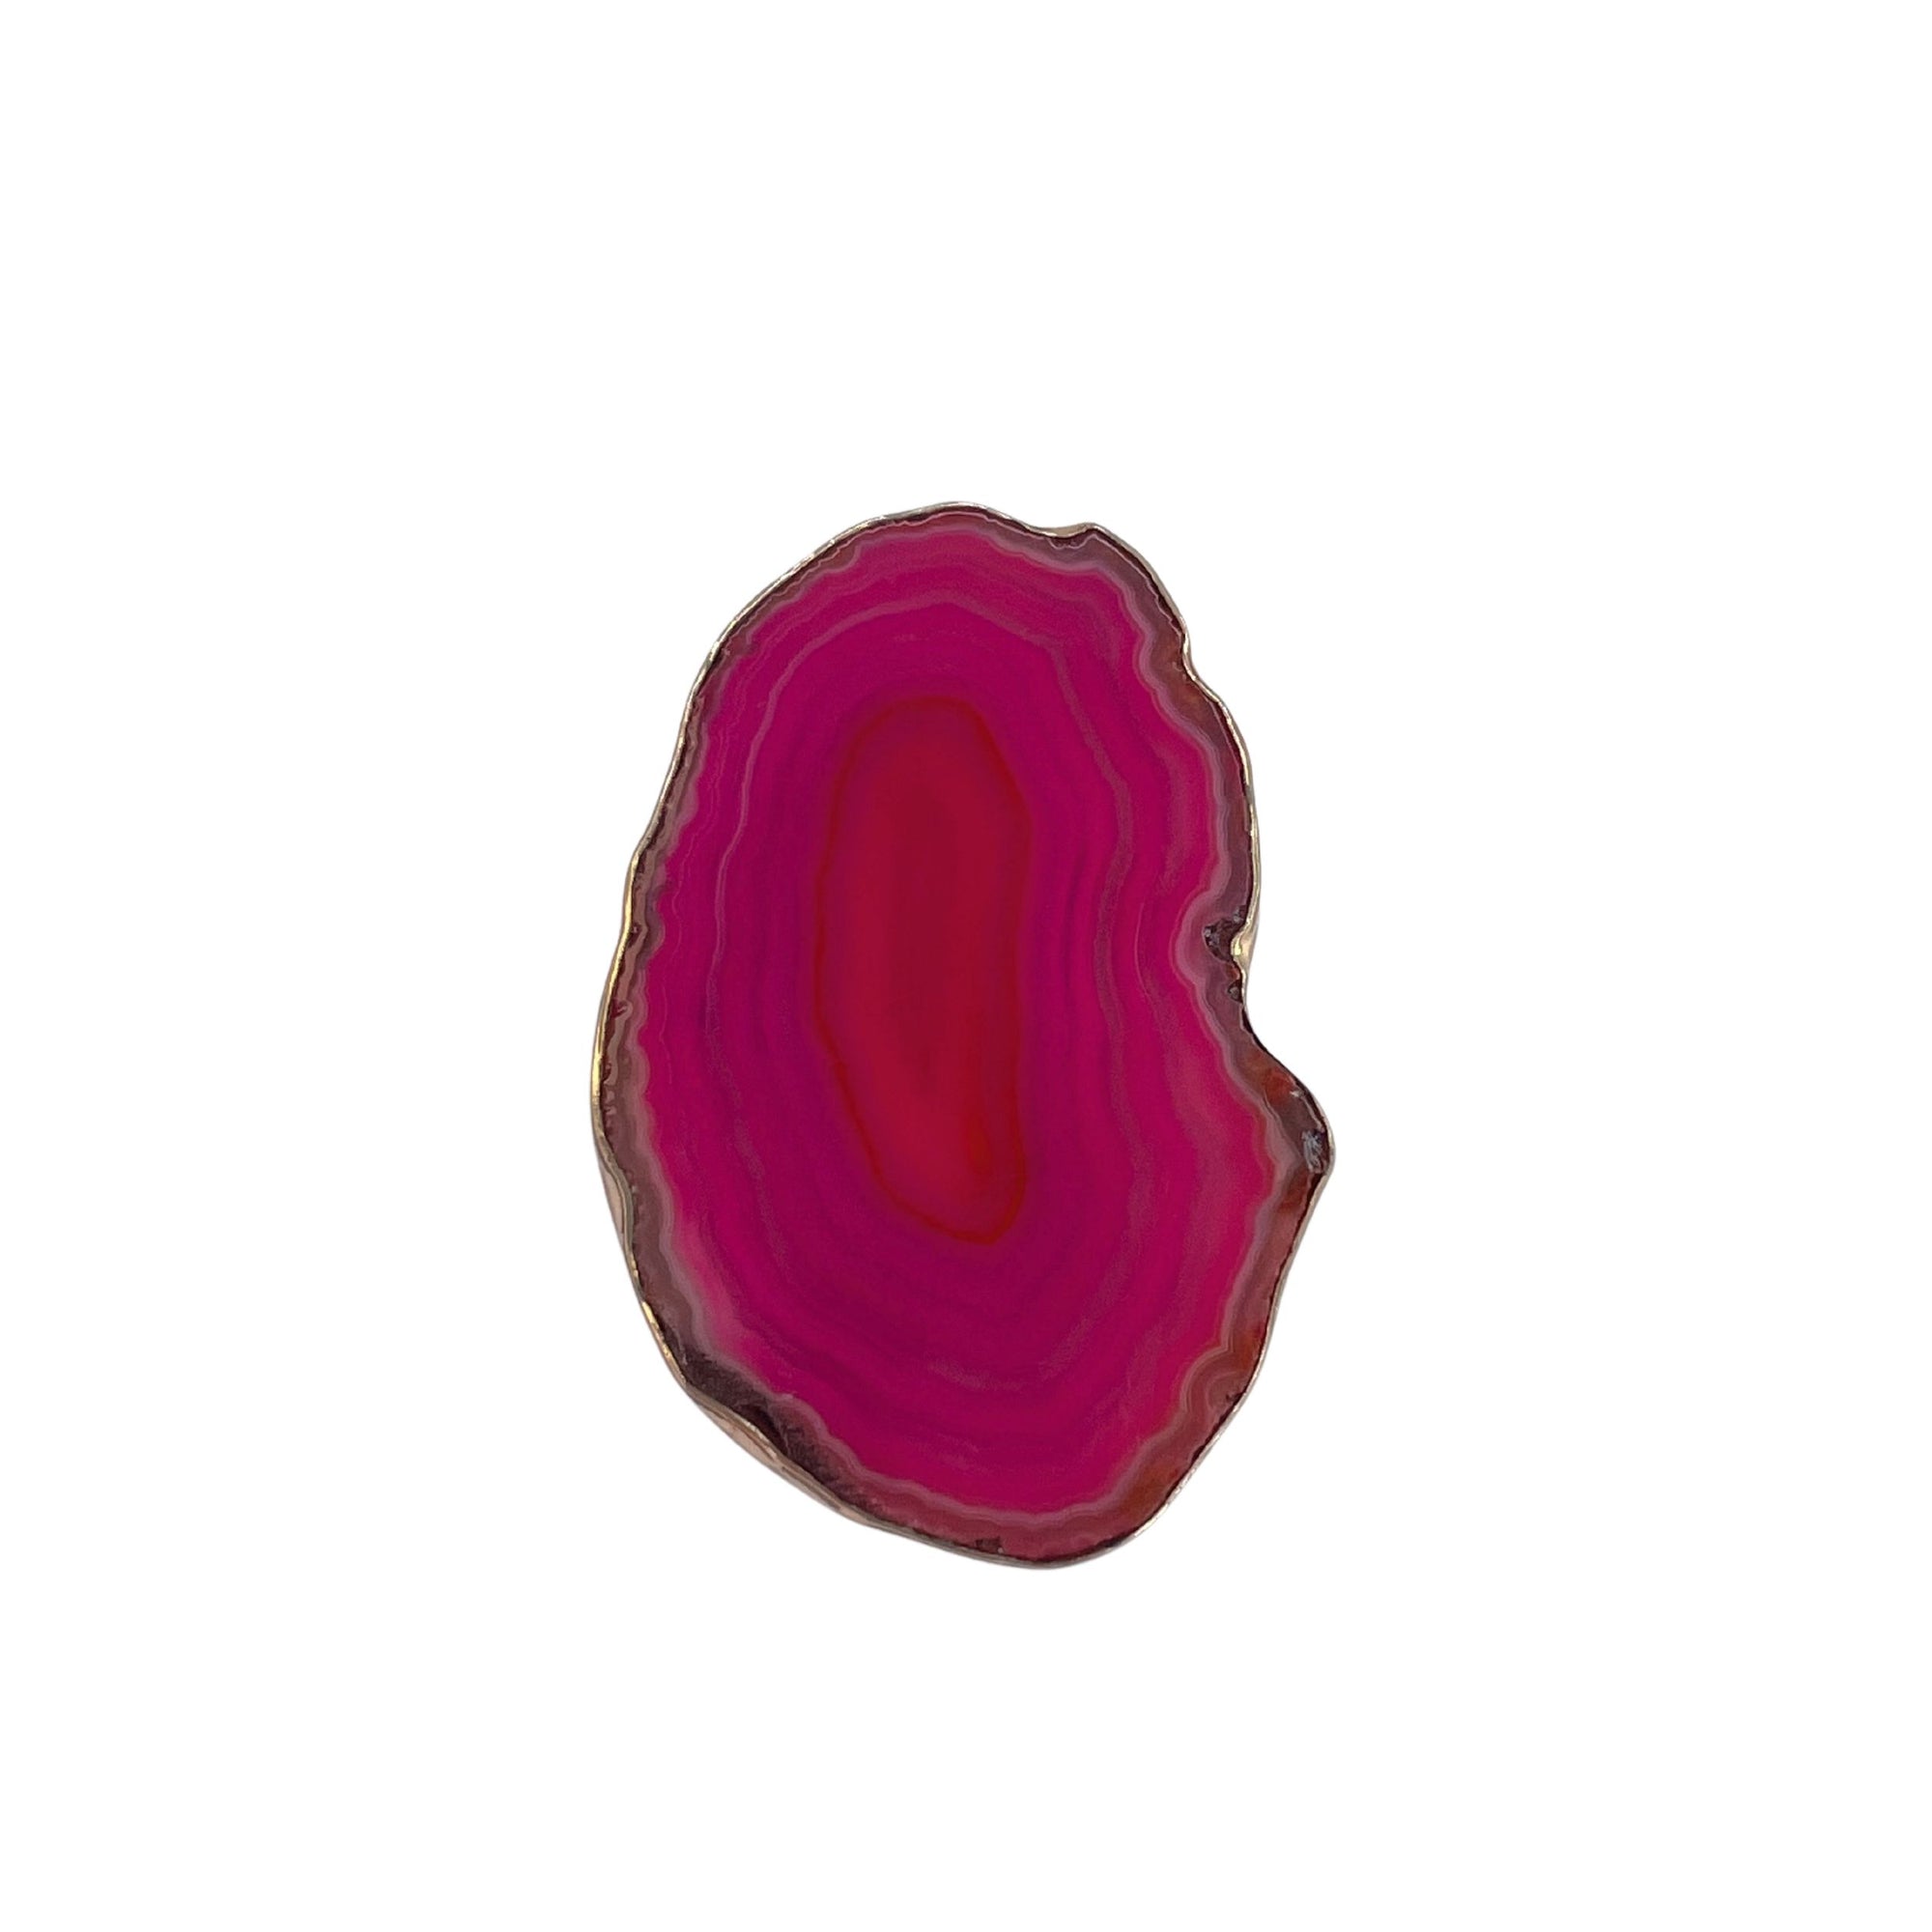 Alchemia Pink Agate Slice Adjustable Ring - Style #5 | Charles Albert Jewelry